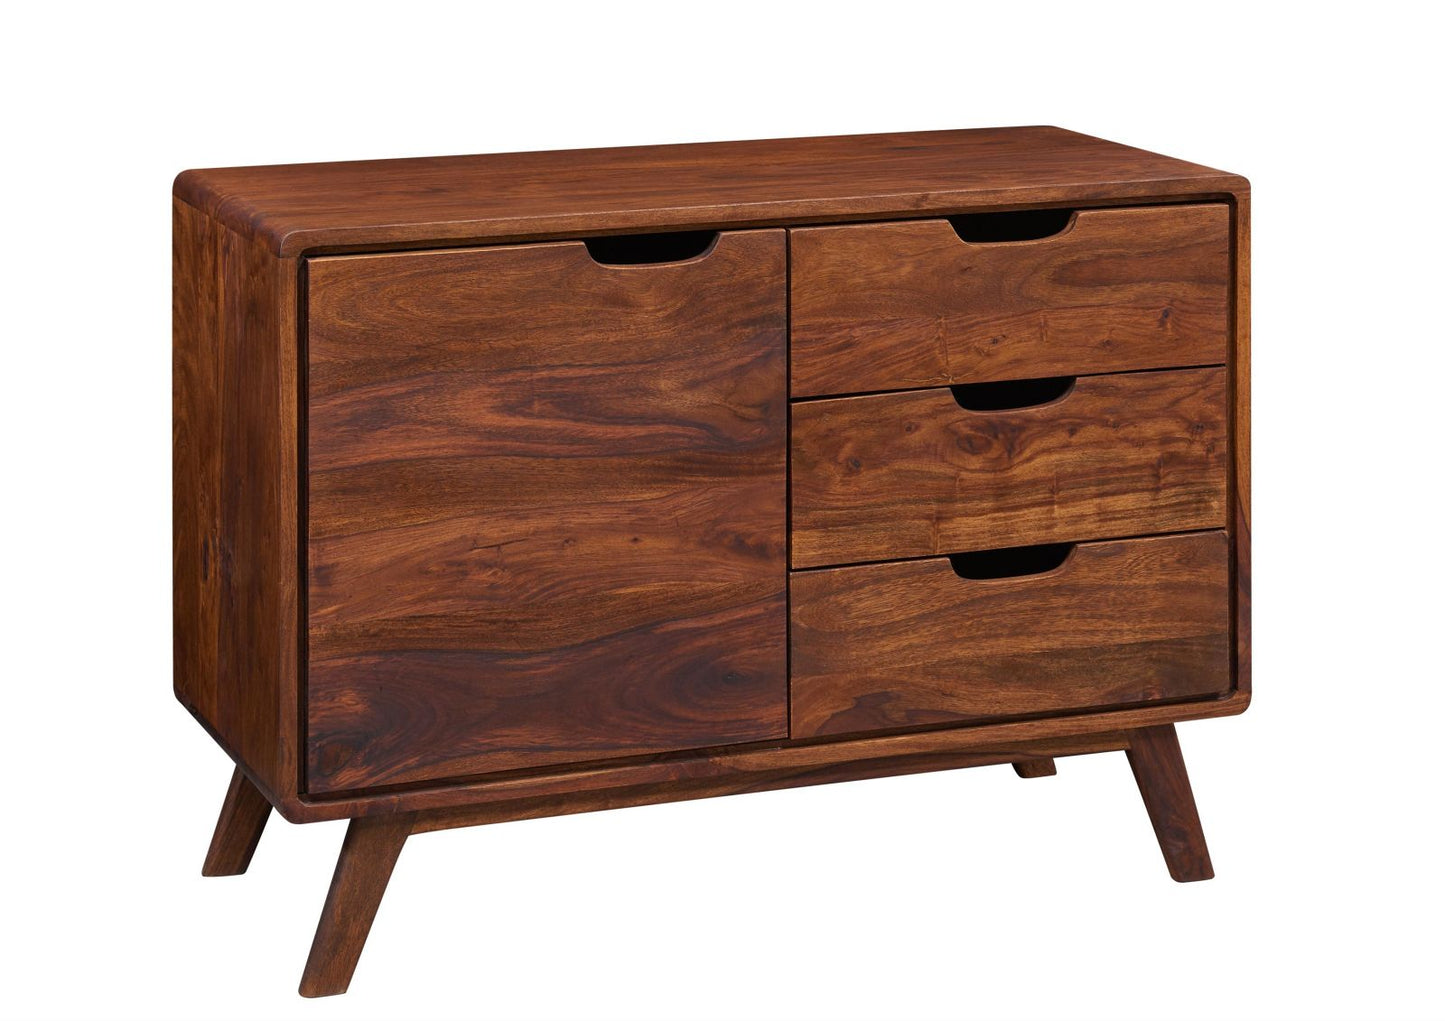 Sideboard with single door and three drawers made of solid sheesham wood